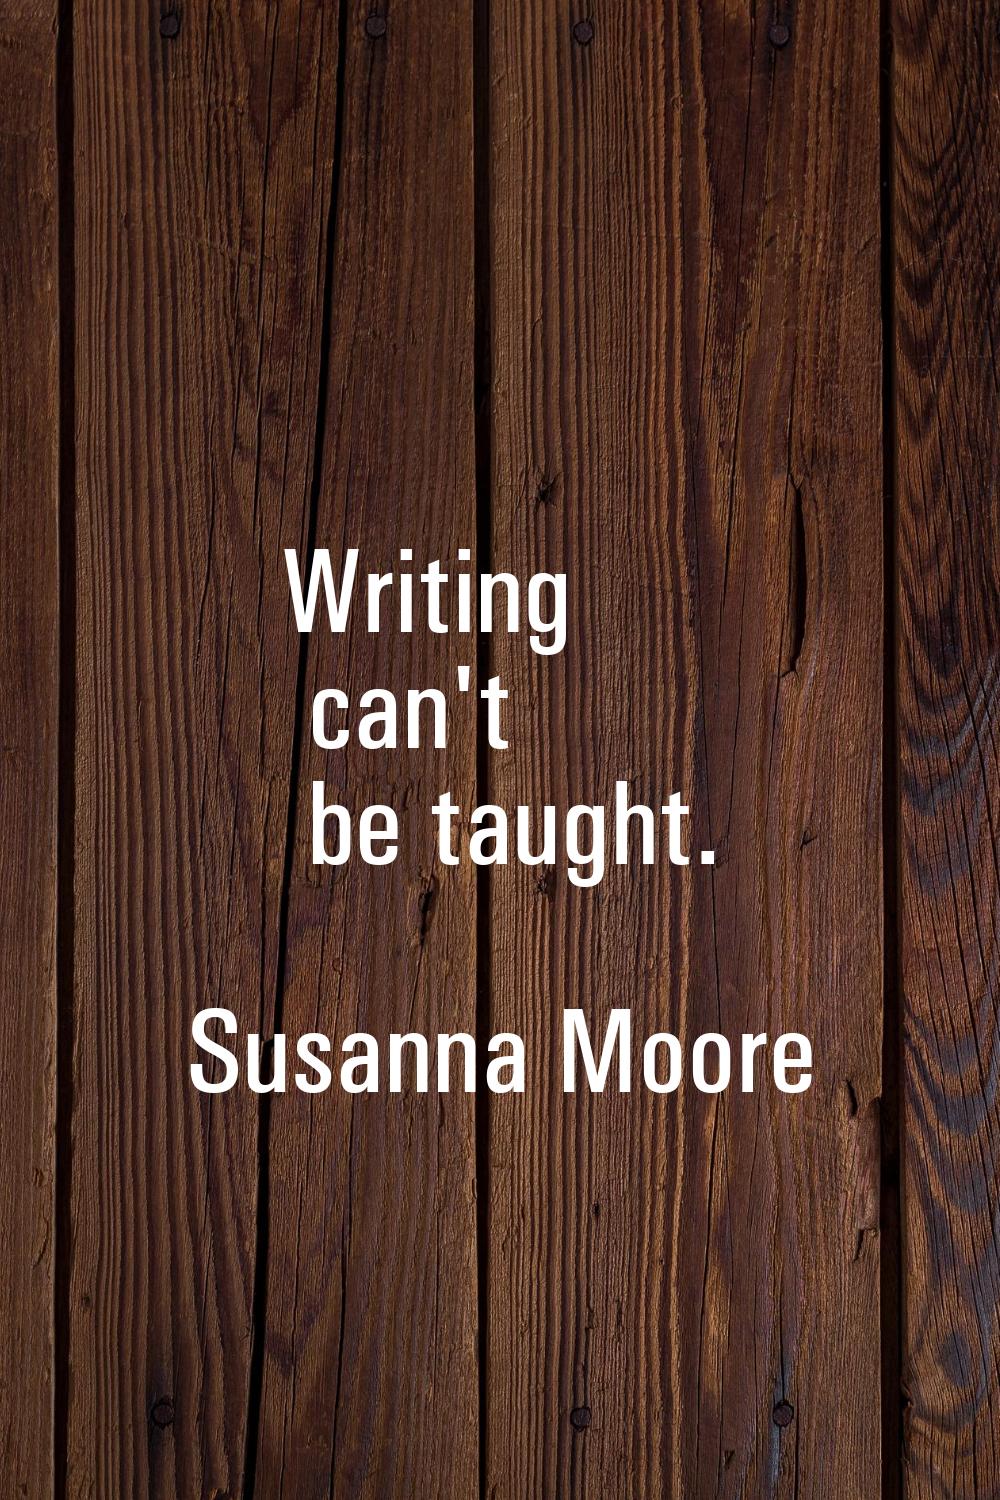 Writing can't be taught.